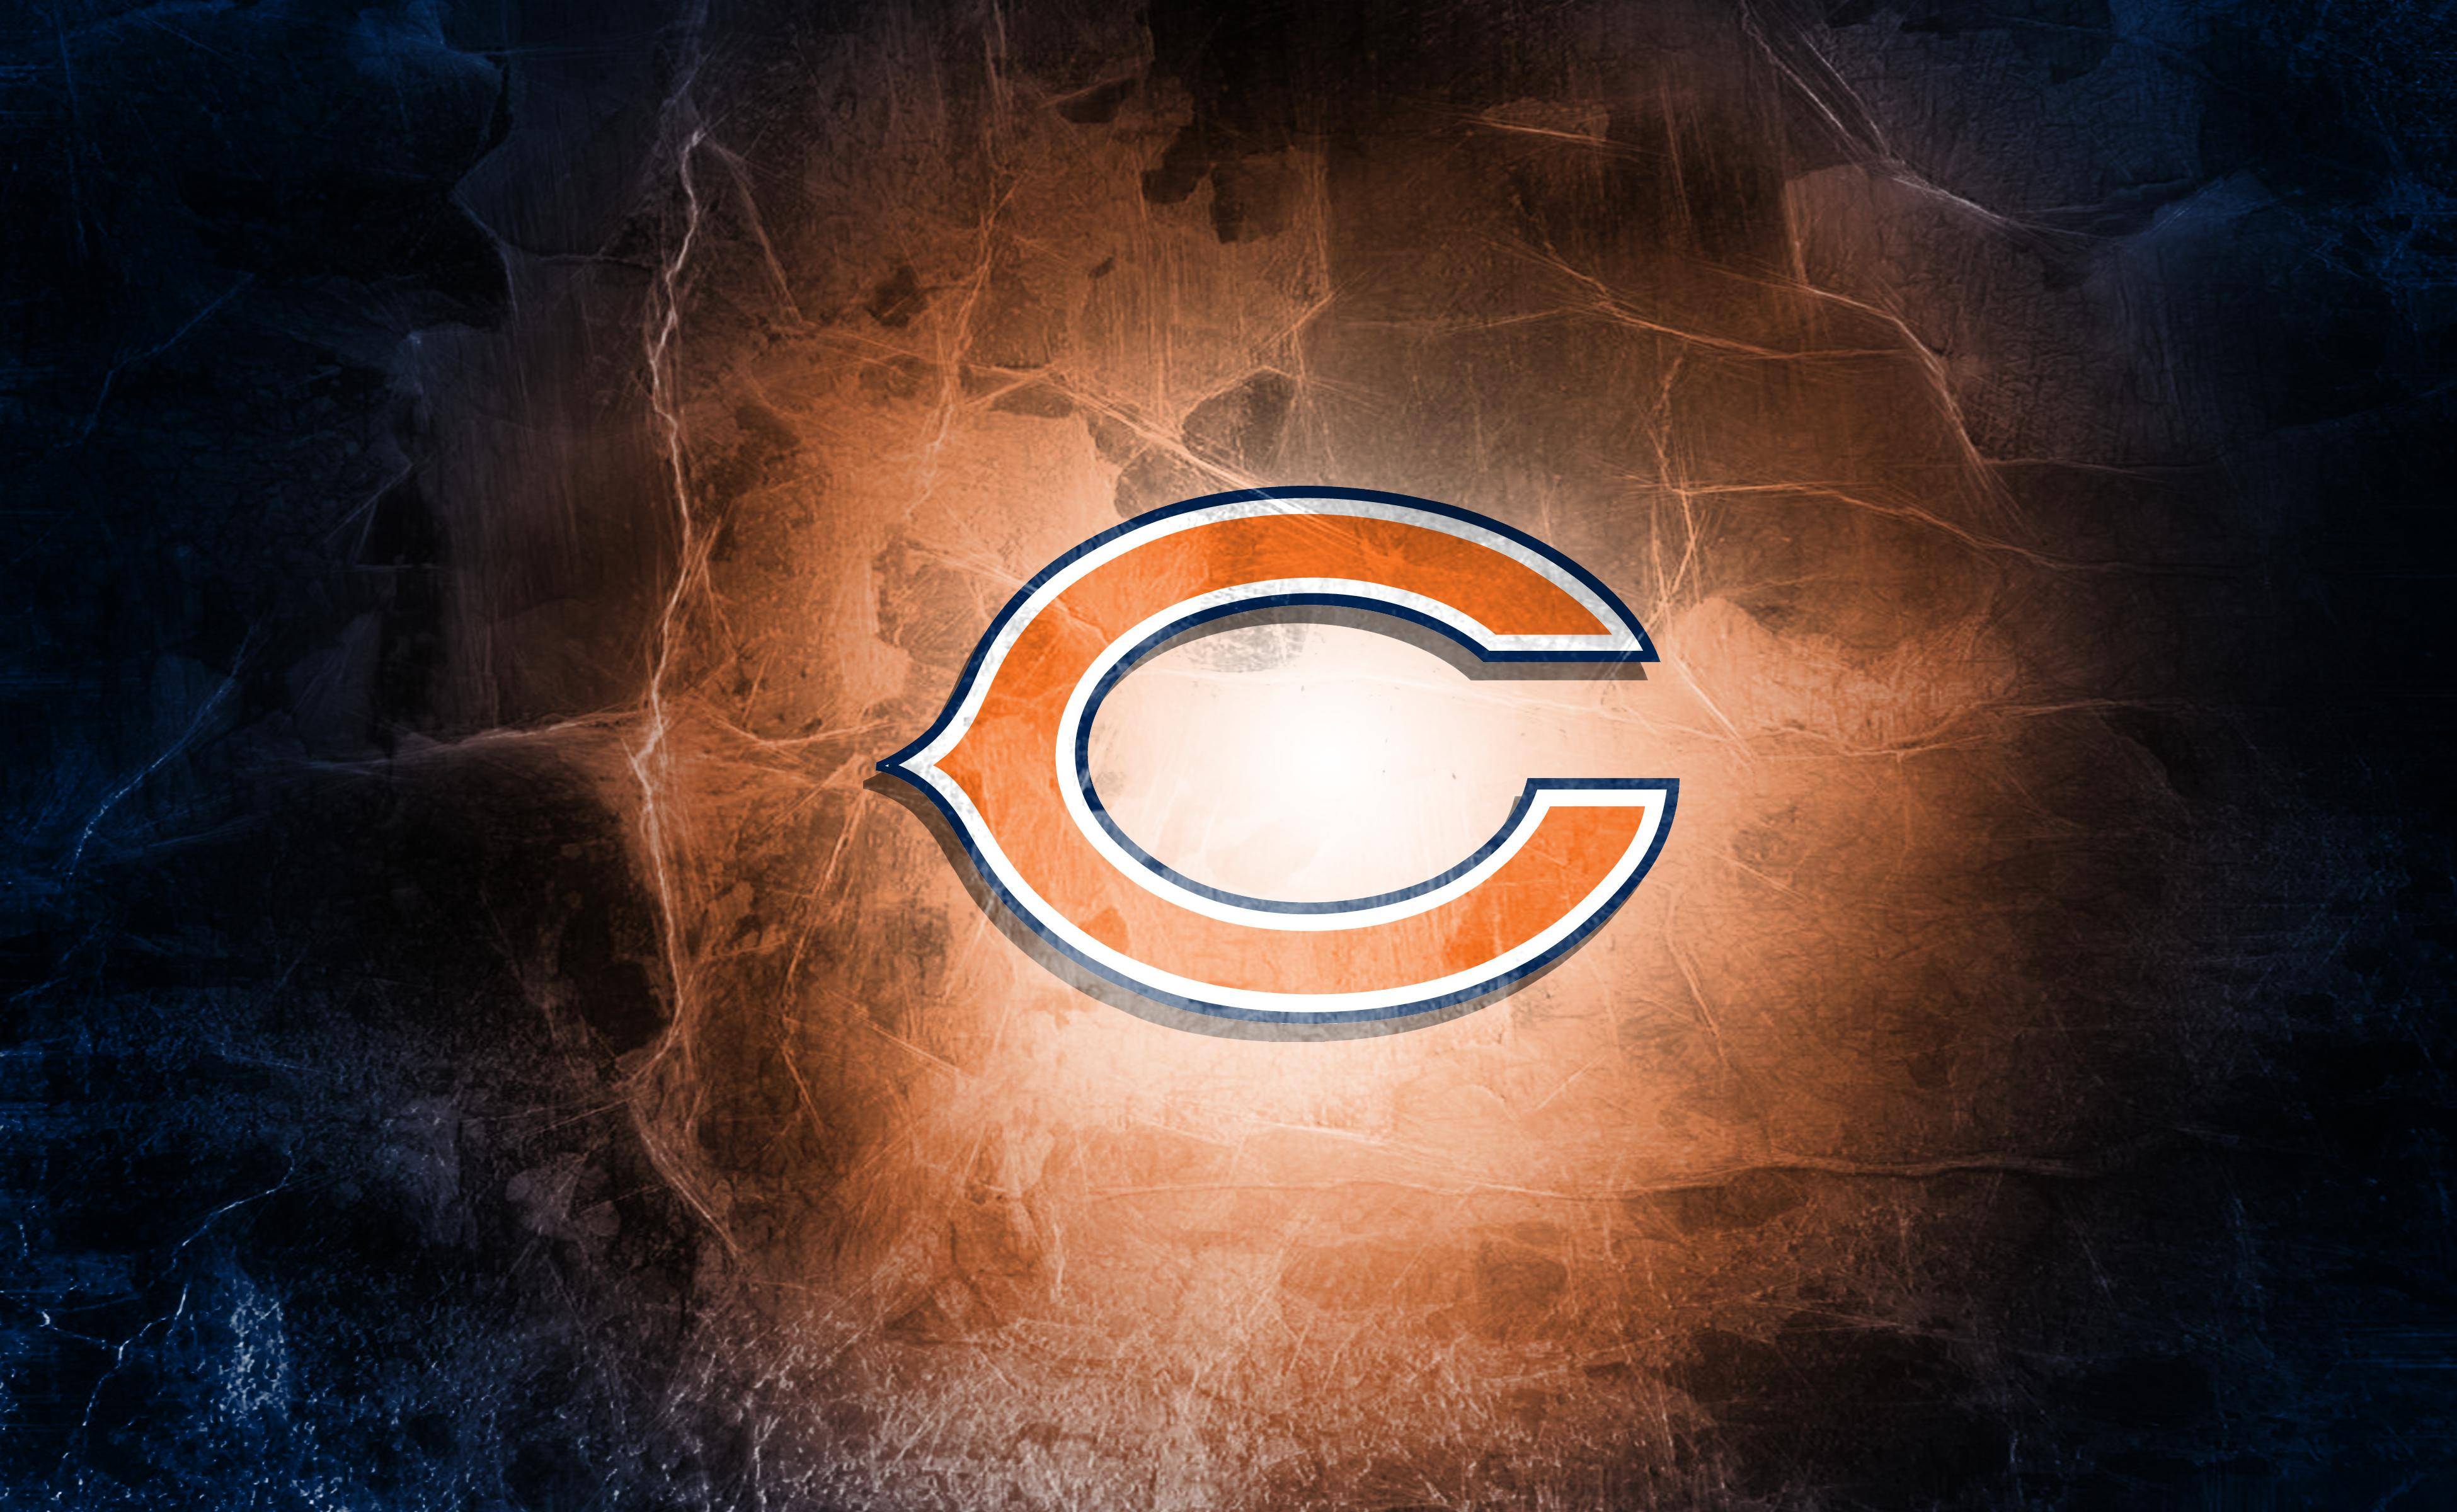 Awesome Chicago Bears wallpaper. Chicago Bears wallpaper